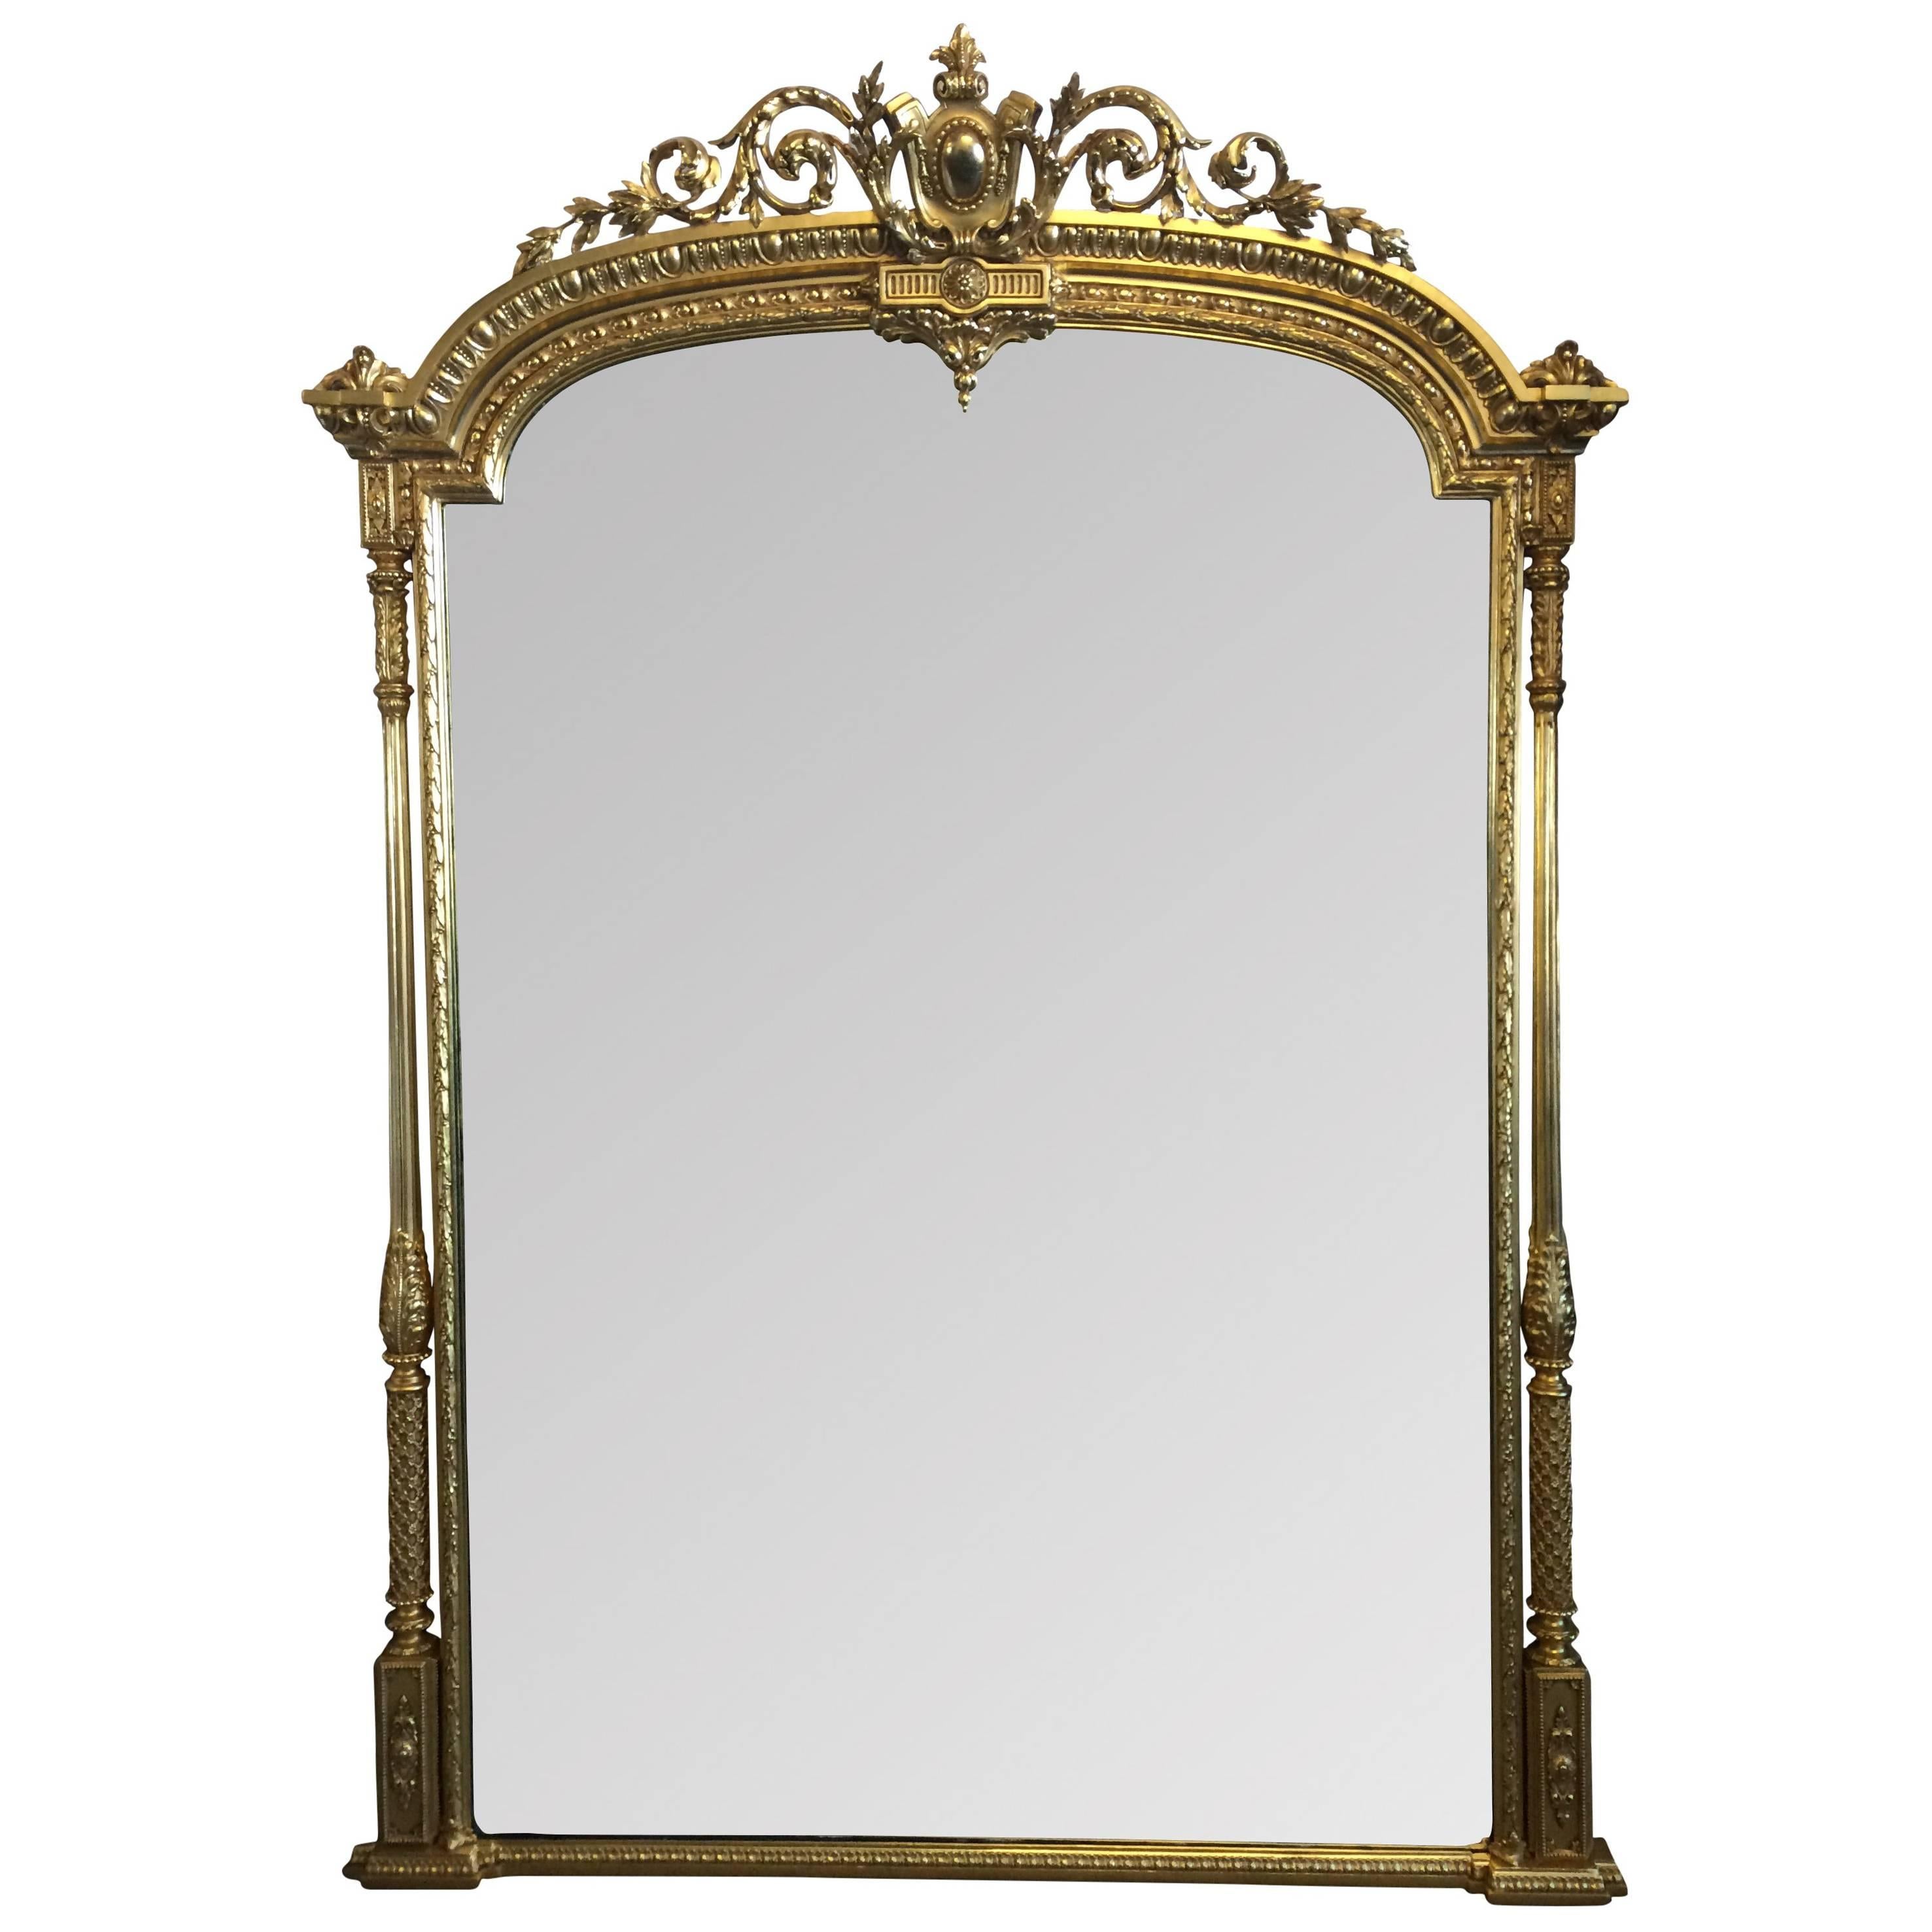 A truly stunning, large mid-19th century English Adams Style gilt framed arch top overmantel mirror with cartouche crest, flanked by ornate columns. In excellent condition, having been regilded in 23.5-carat gold by Master Guilders. 